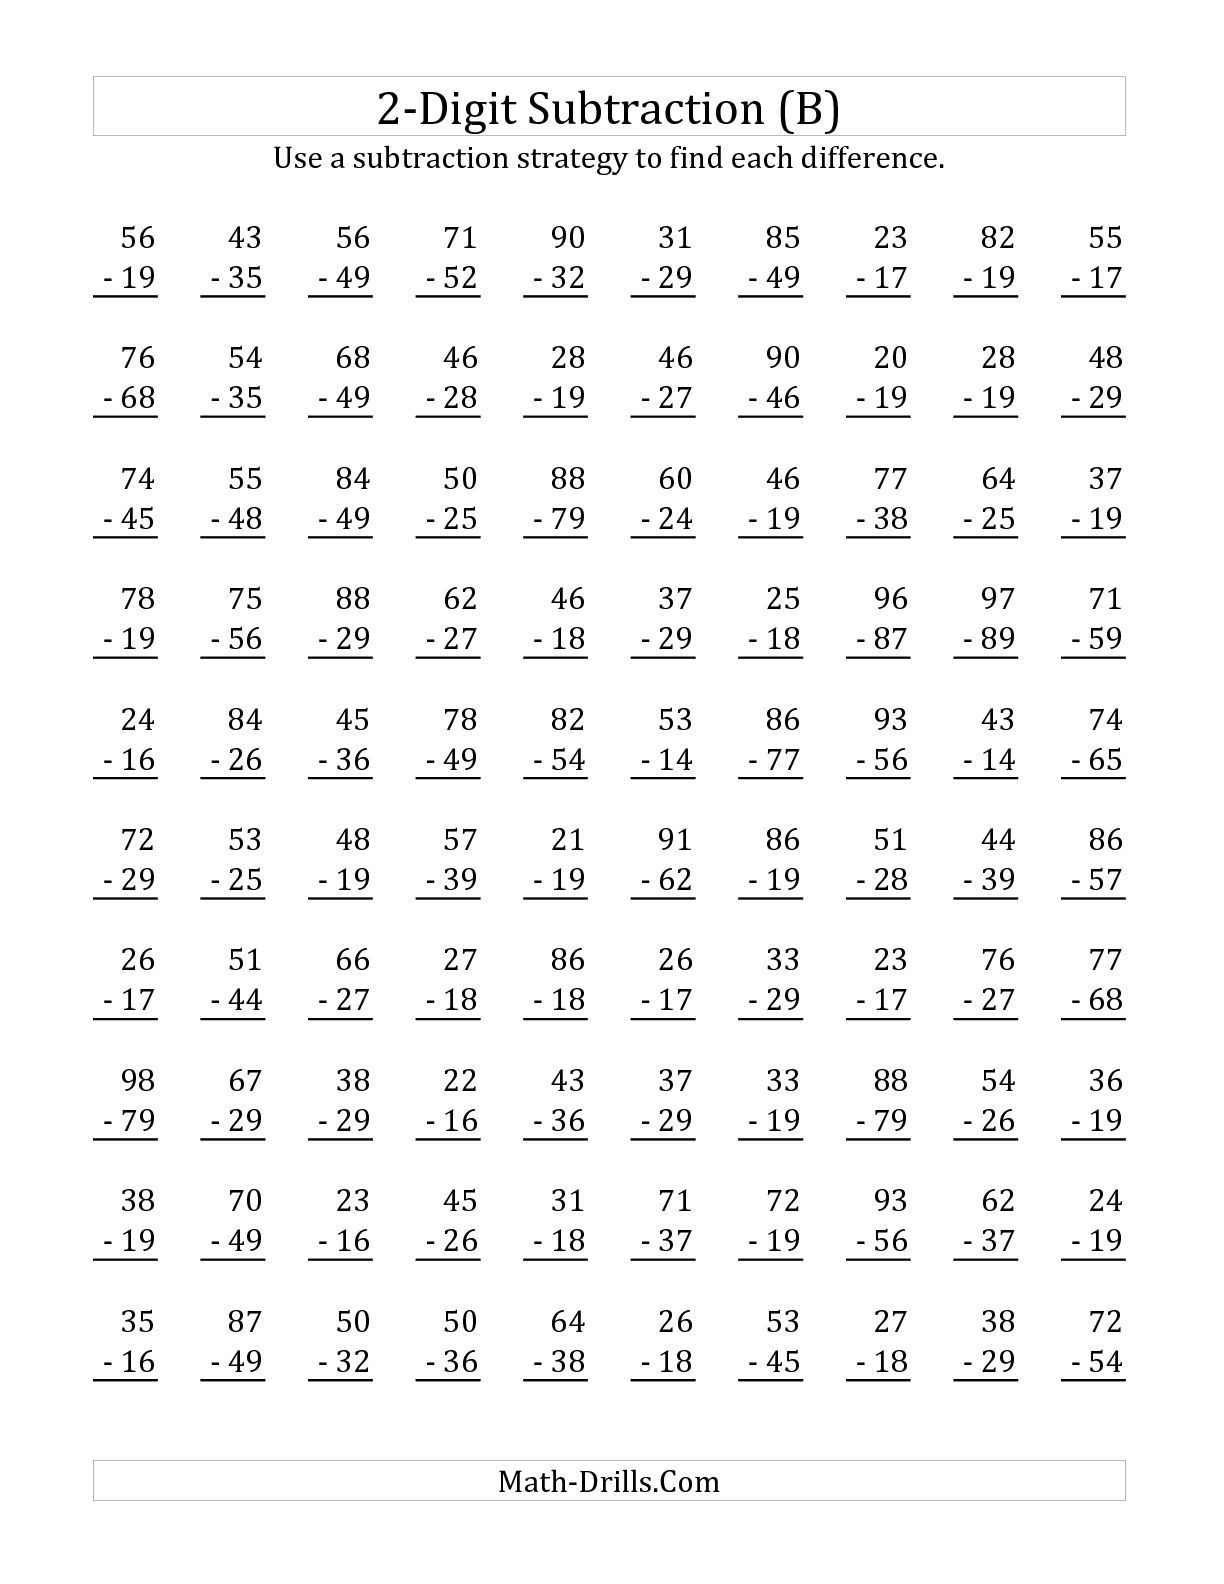 Free Math Worksheets Second Grade 2 Subtraction Subtracting 1 Digit From 2 Digit Missing Number No Regrouping